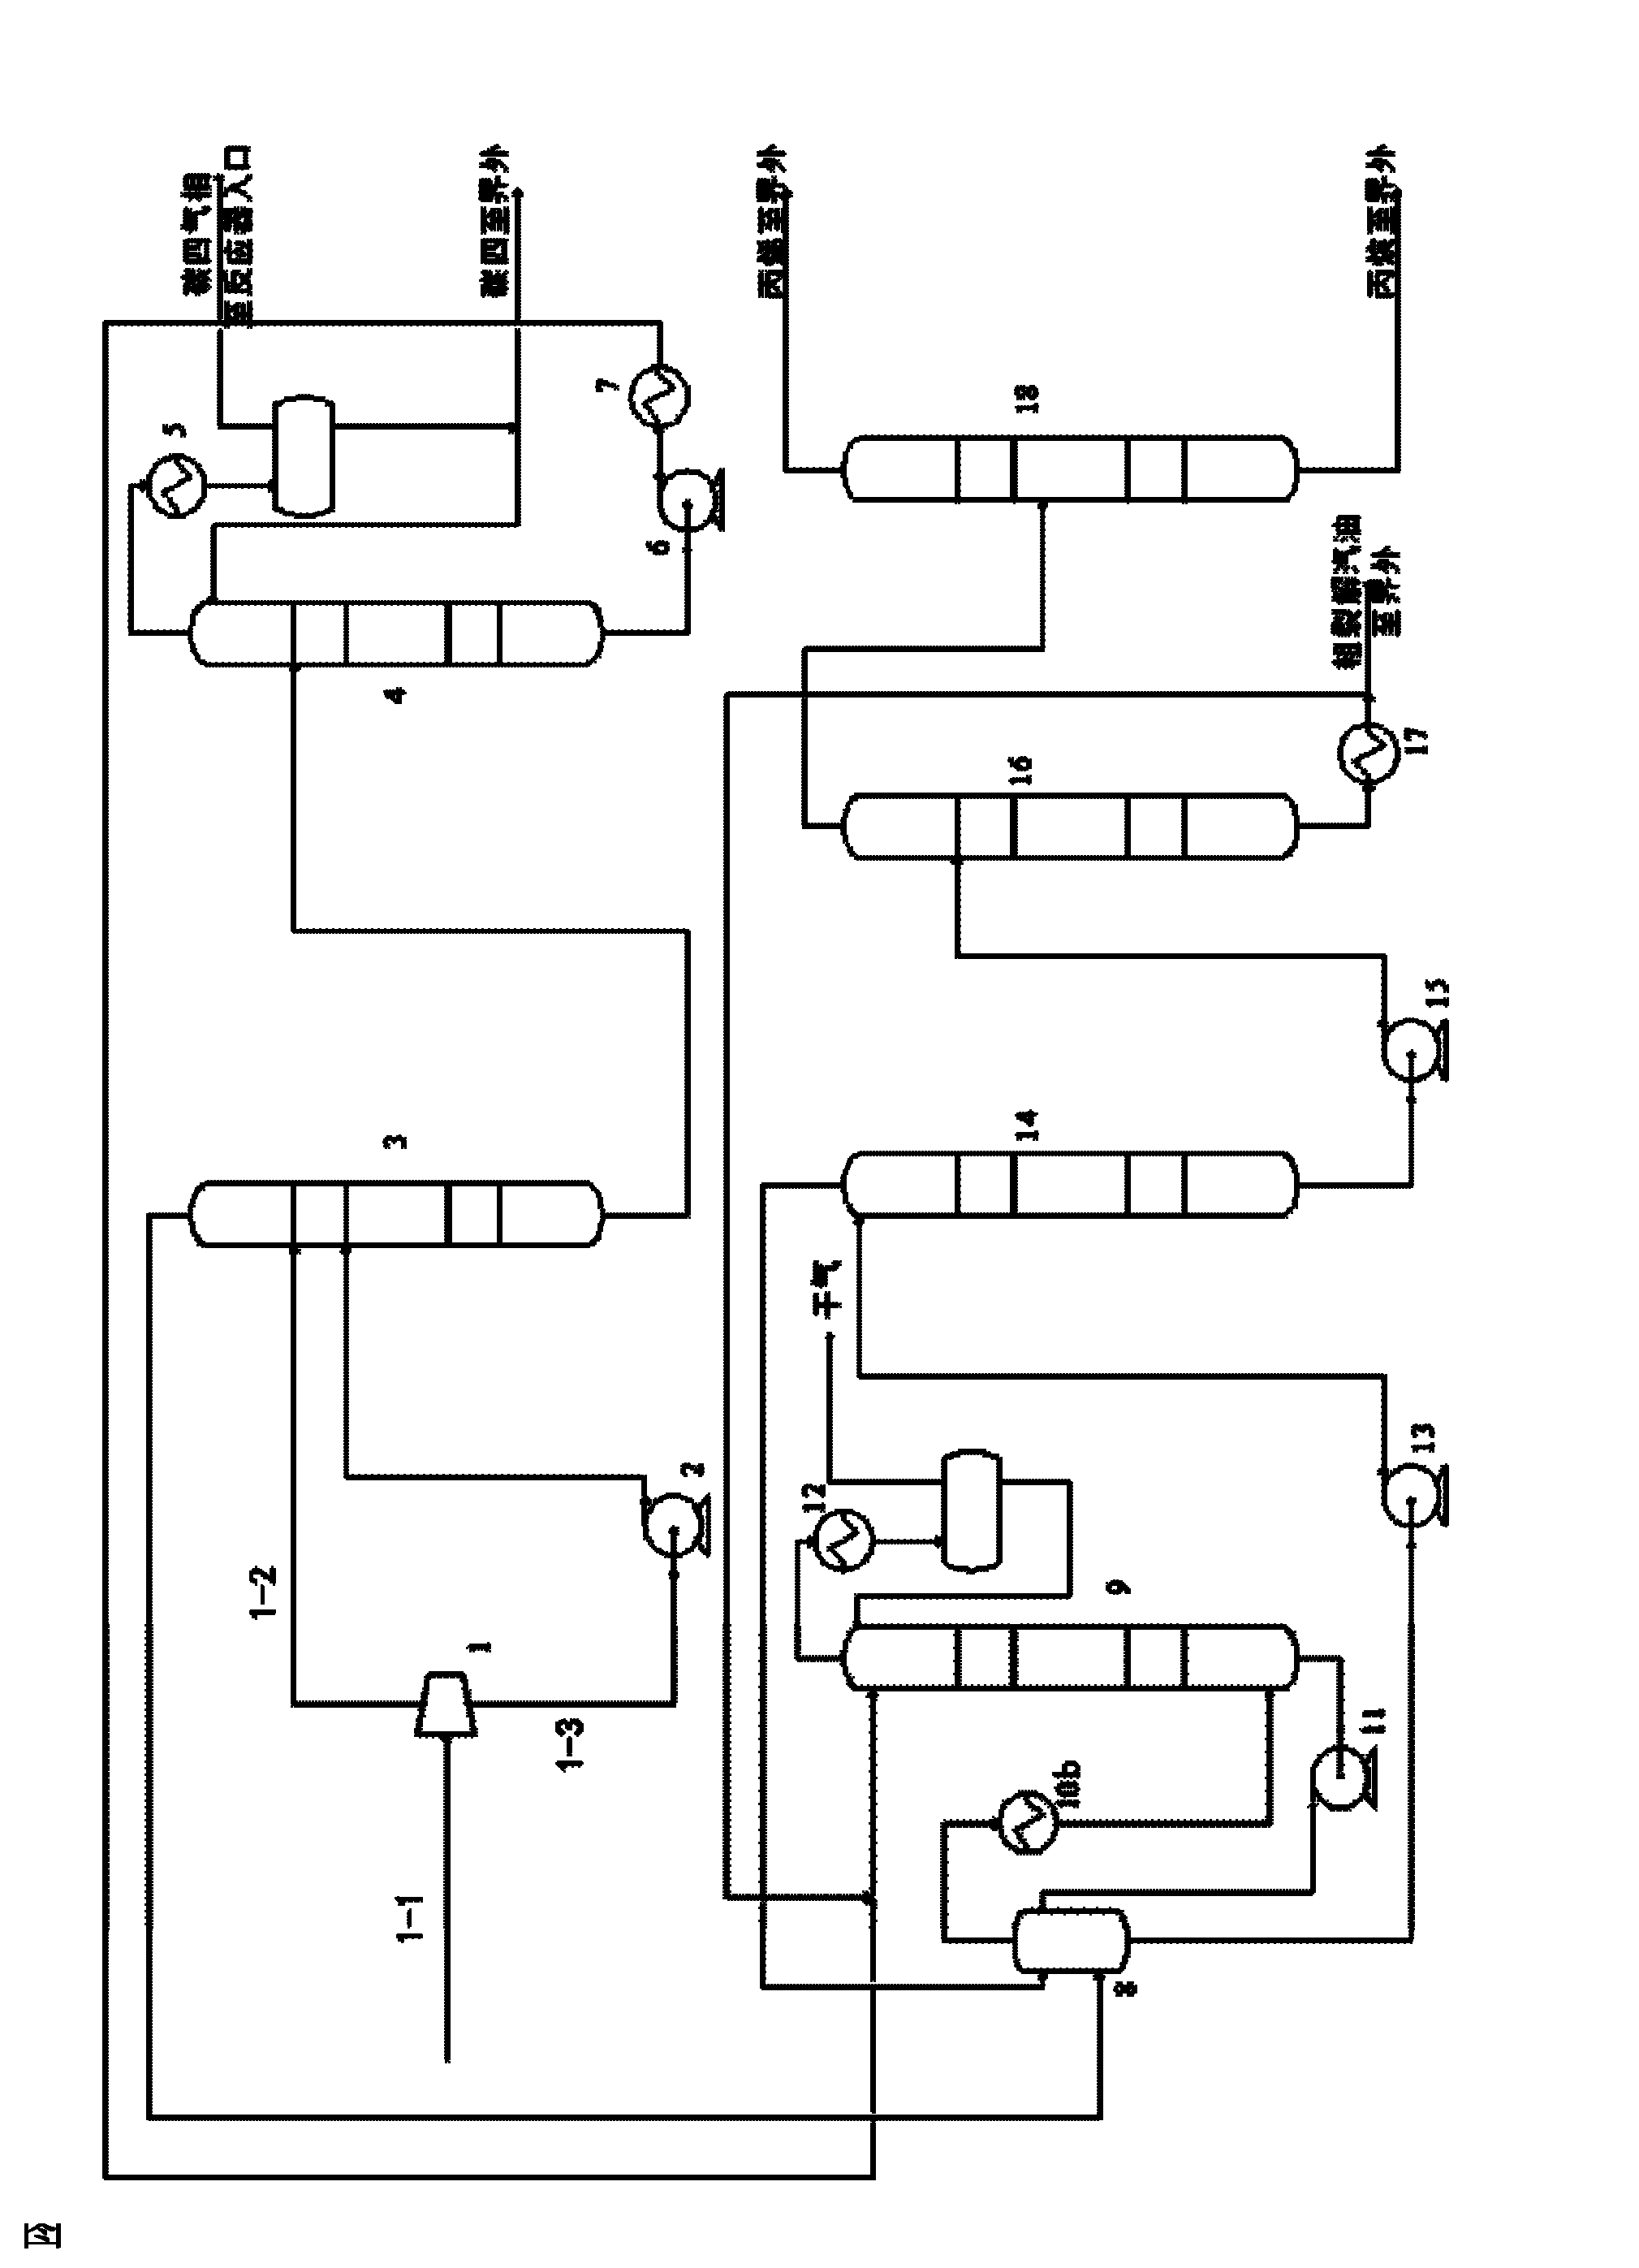 System and method for preparing polymer-grade propylene through absorption and separation of catalytic cracking product gas